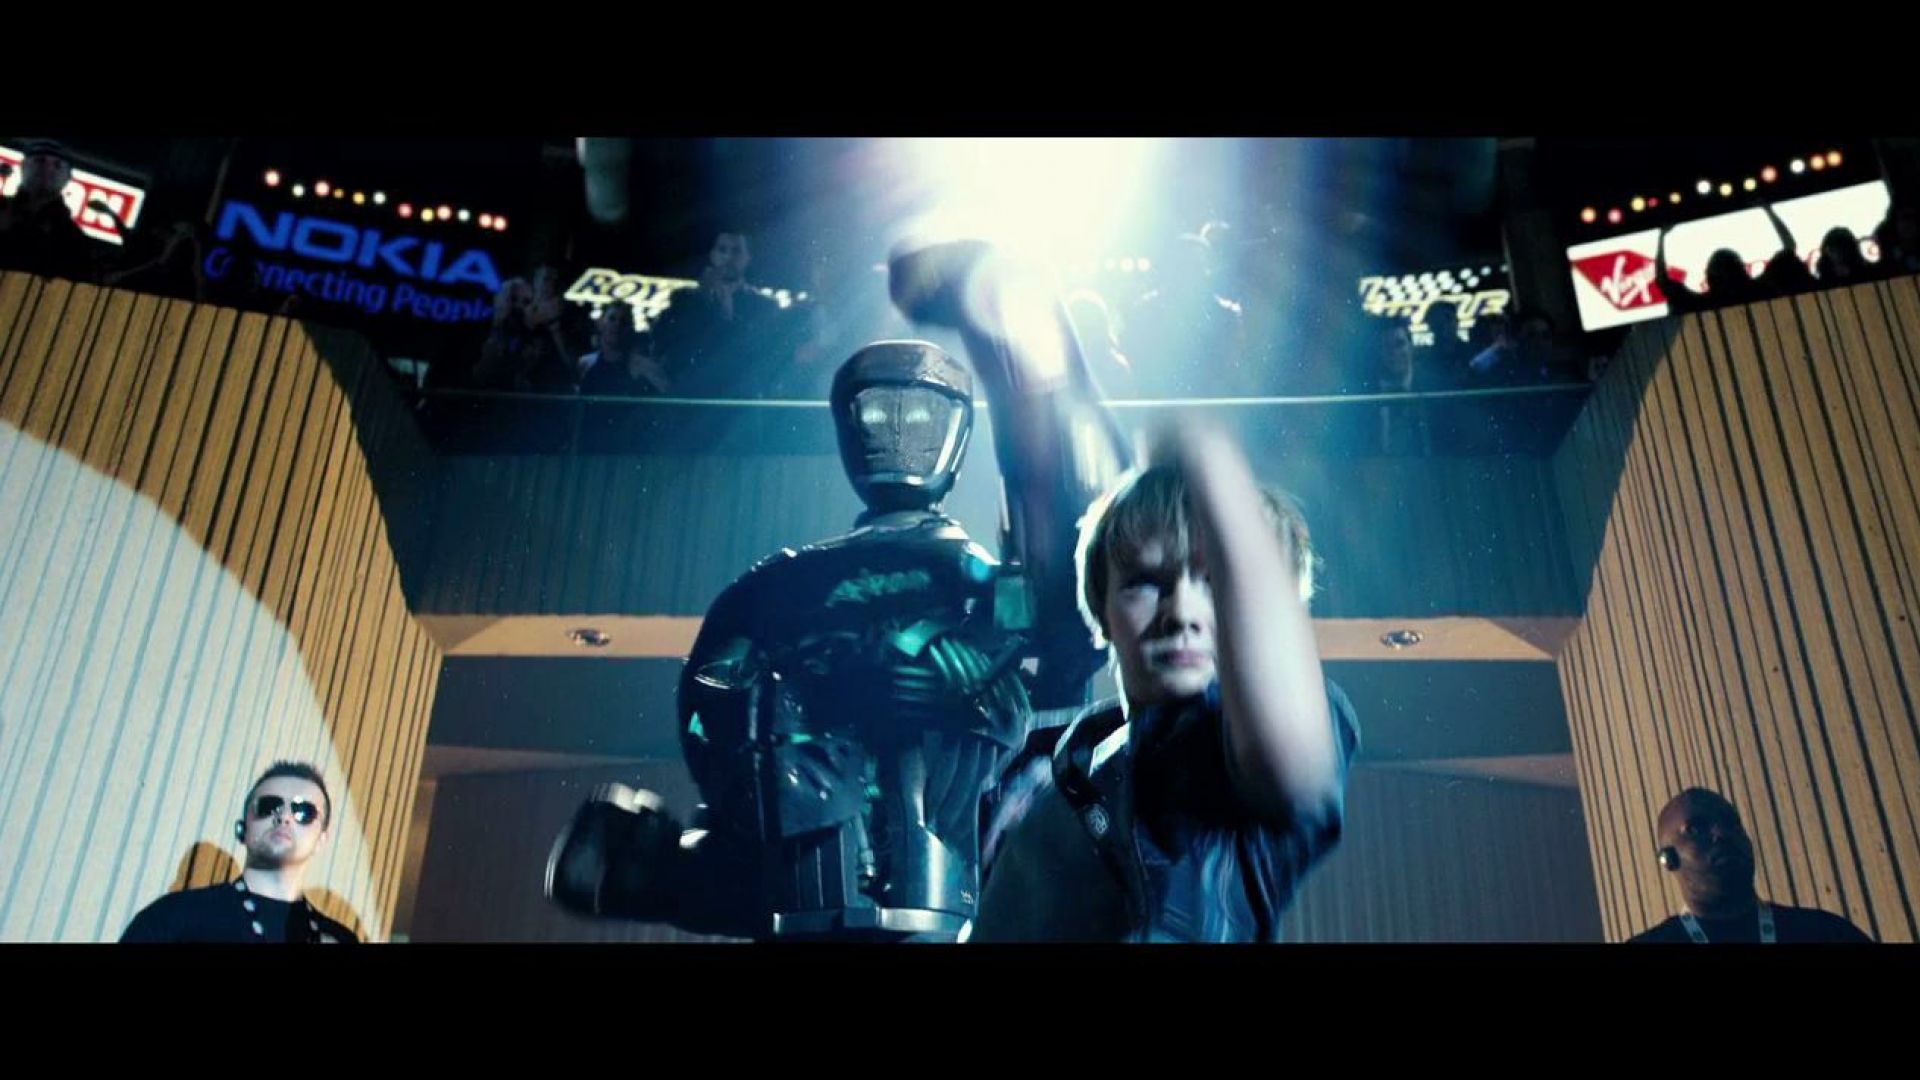 Max dances with the robot in Real Steel